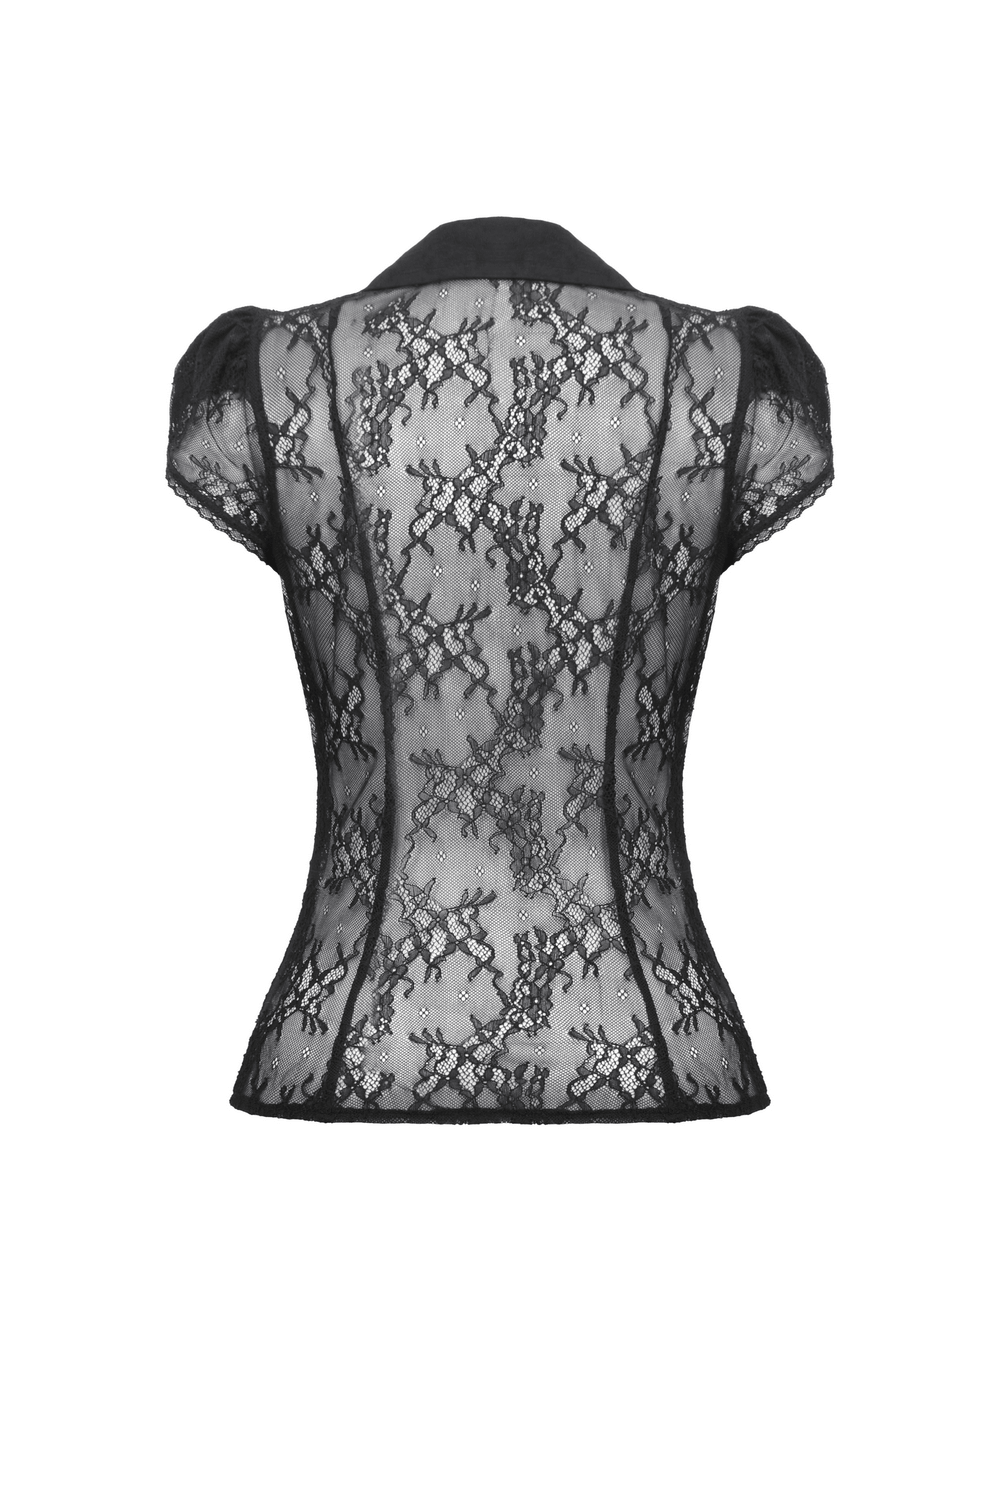 Women's Black Lace Blouse with Puff Short Sleeves